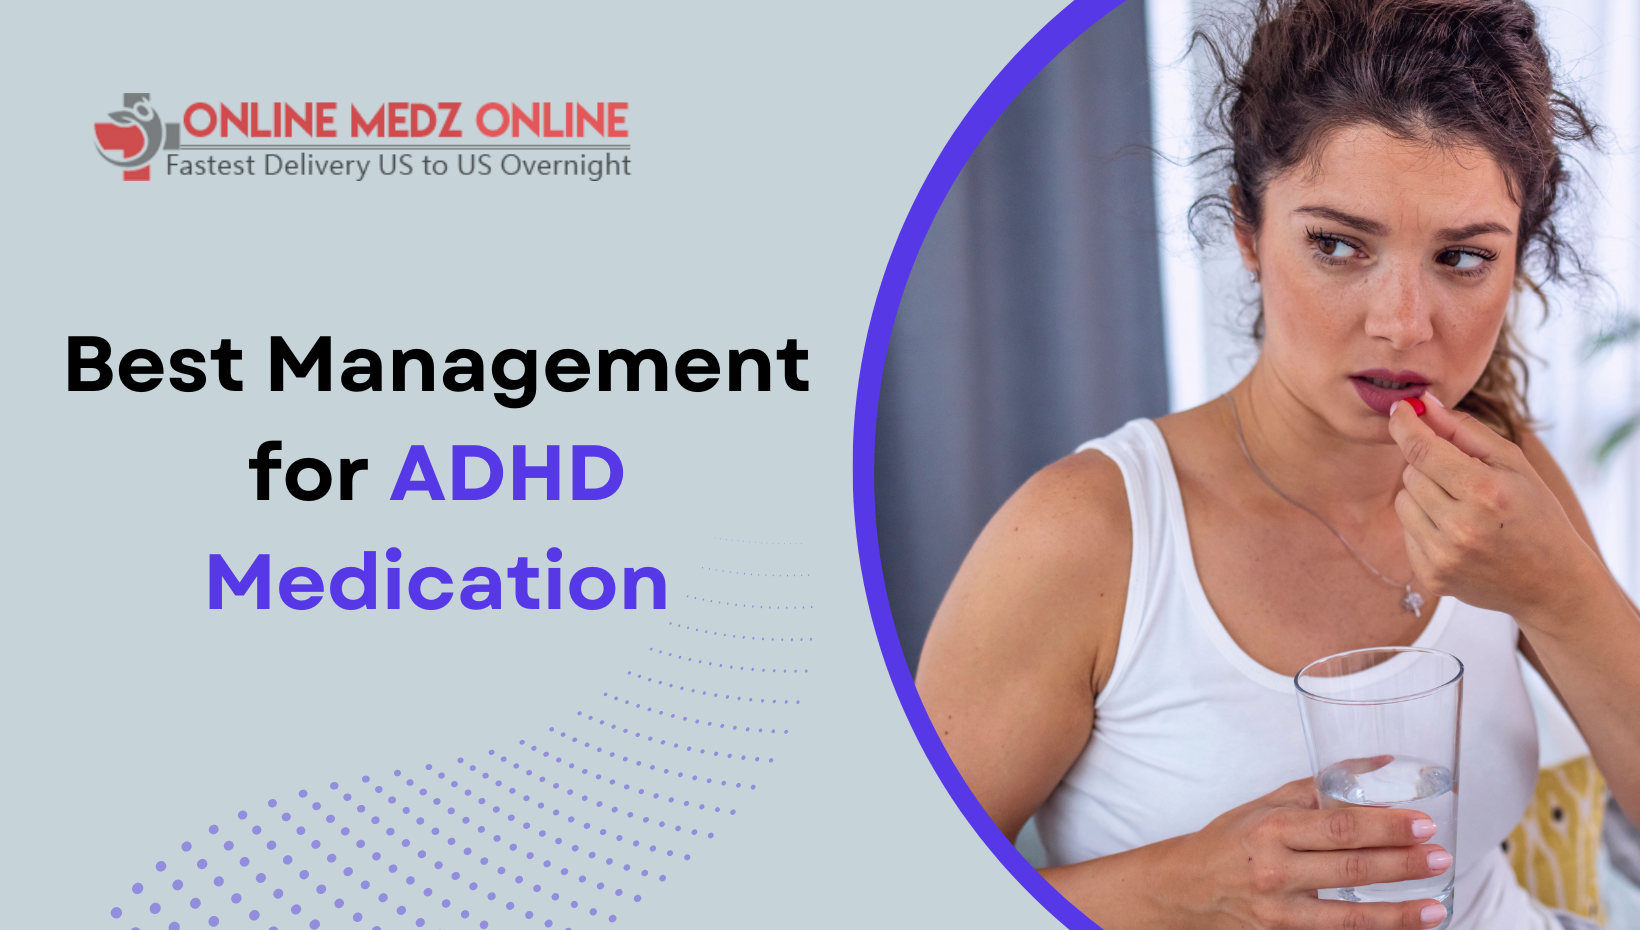 Best Management for ADHD Medication